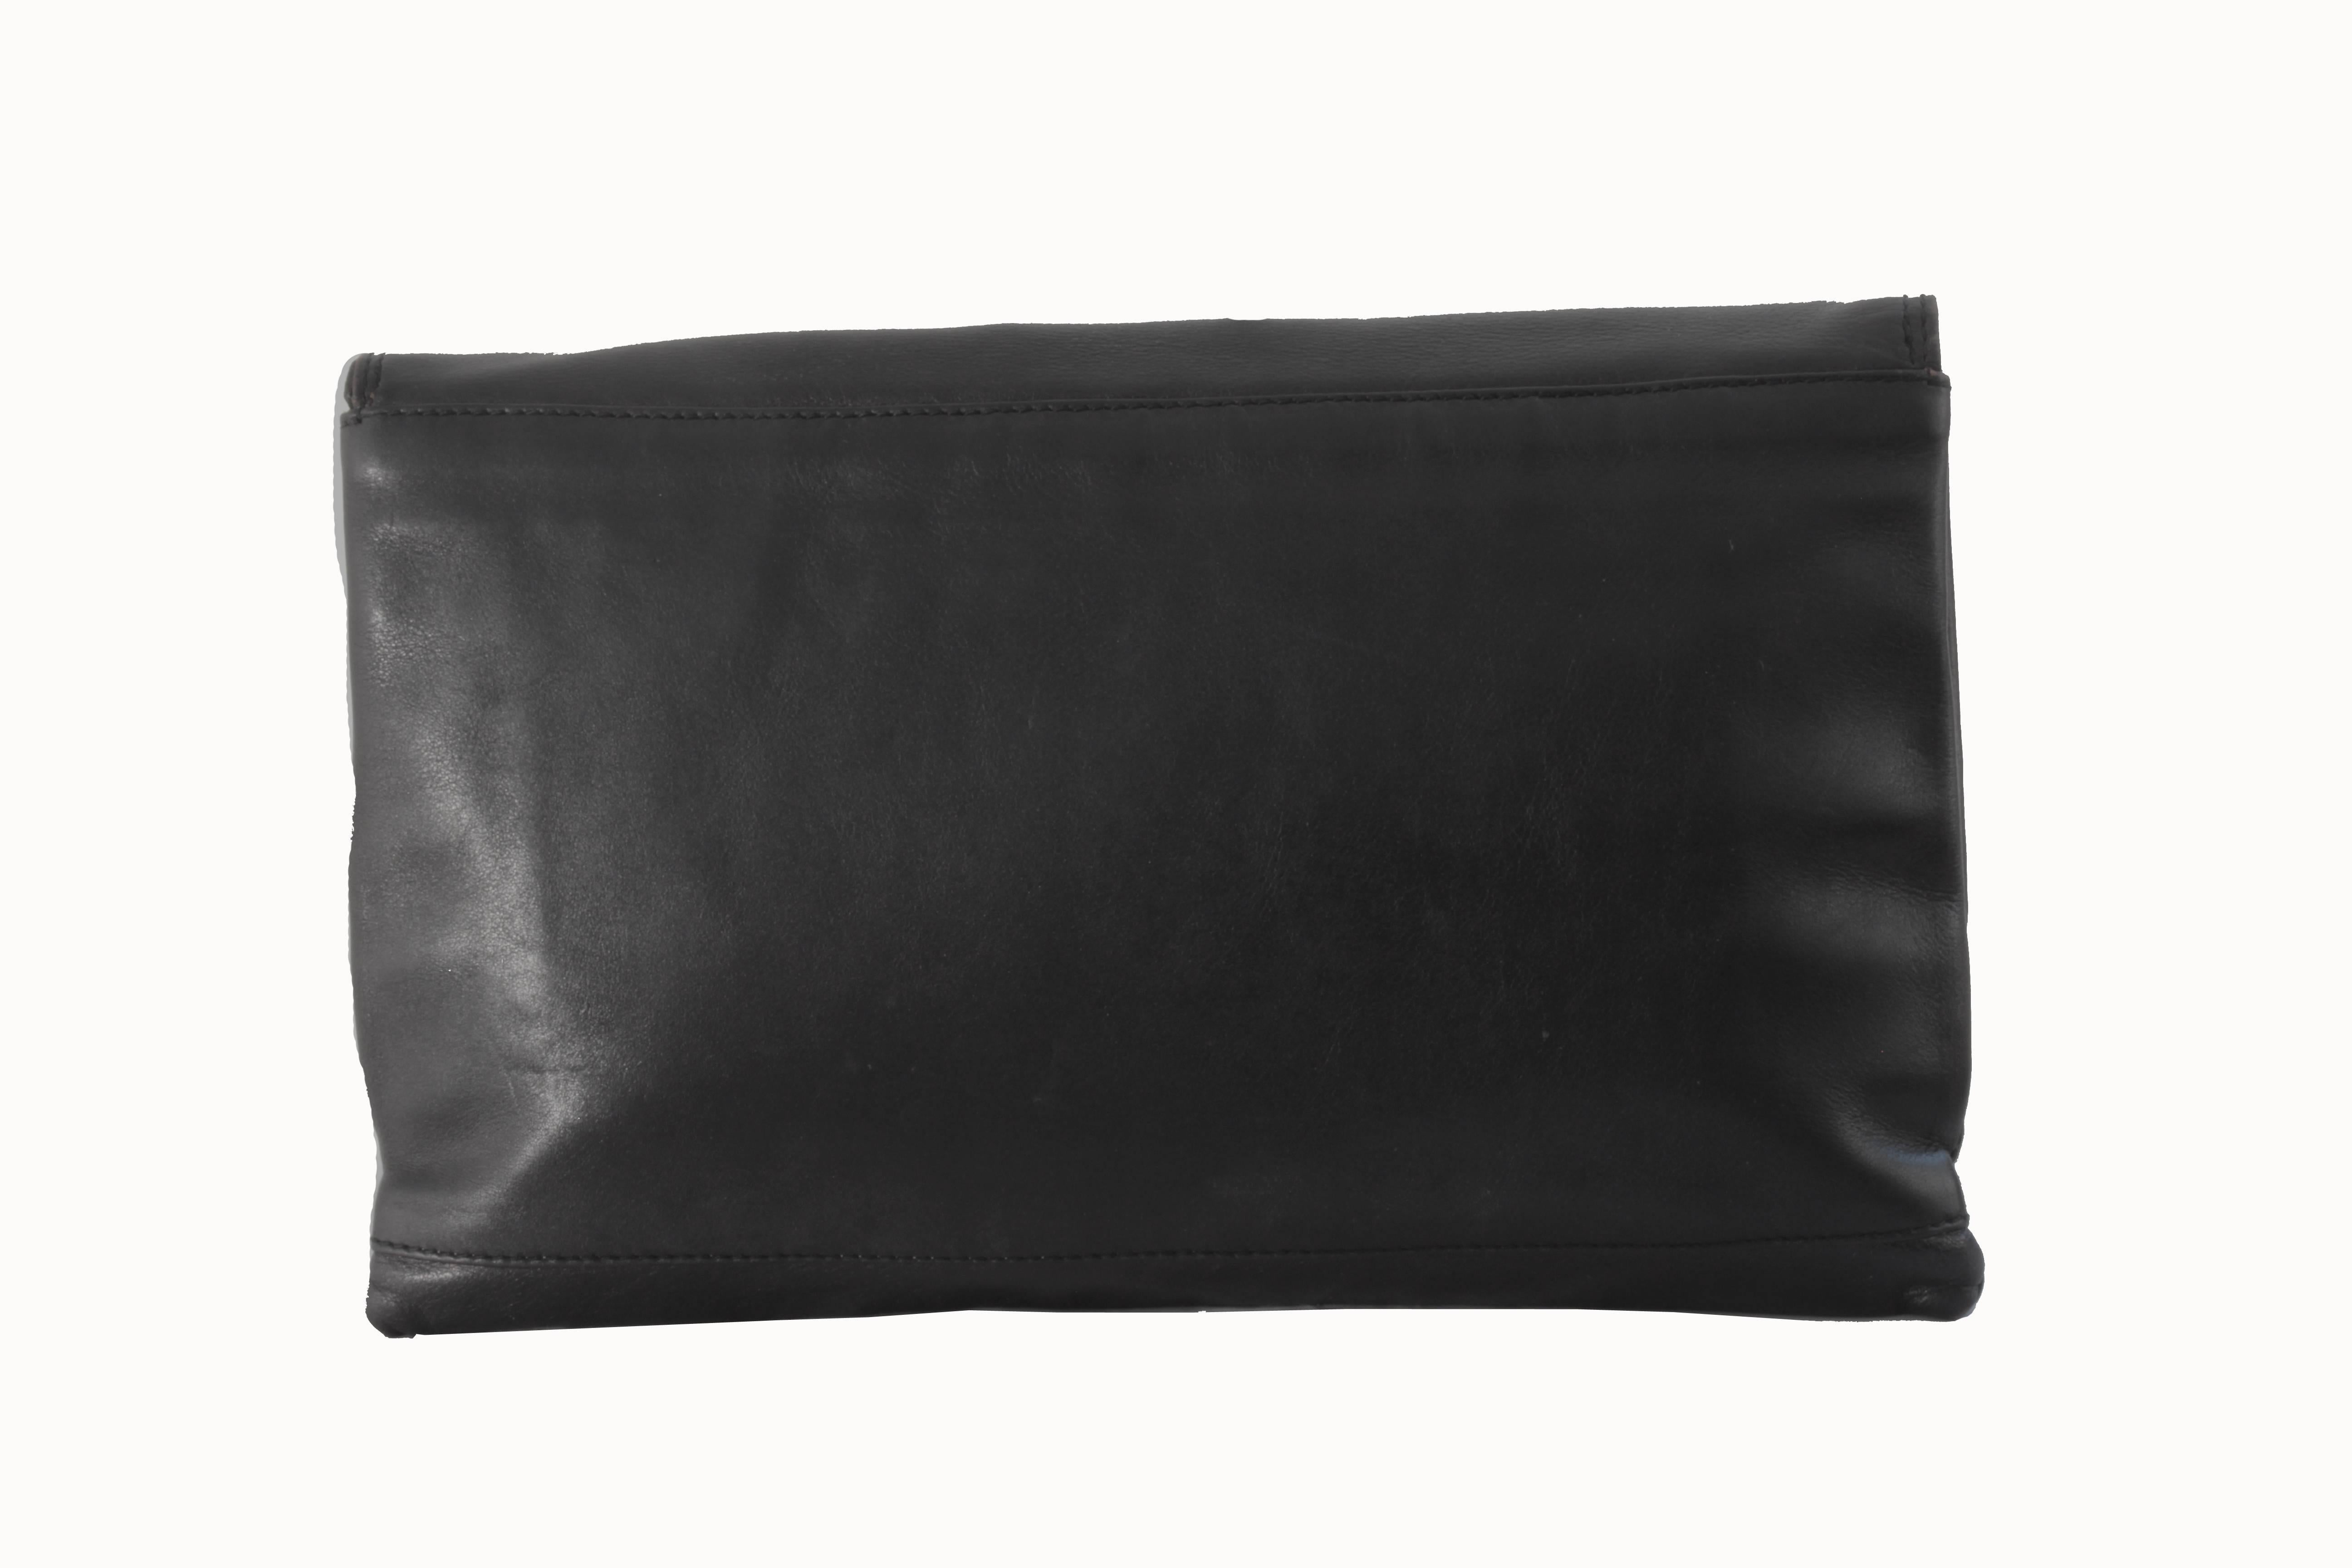 Women's Black Leather Clutch Bag Purse from Dayton's Department Store, Italy 1960s